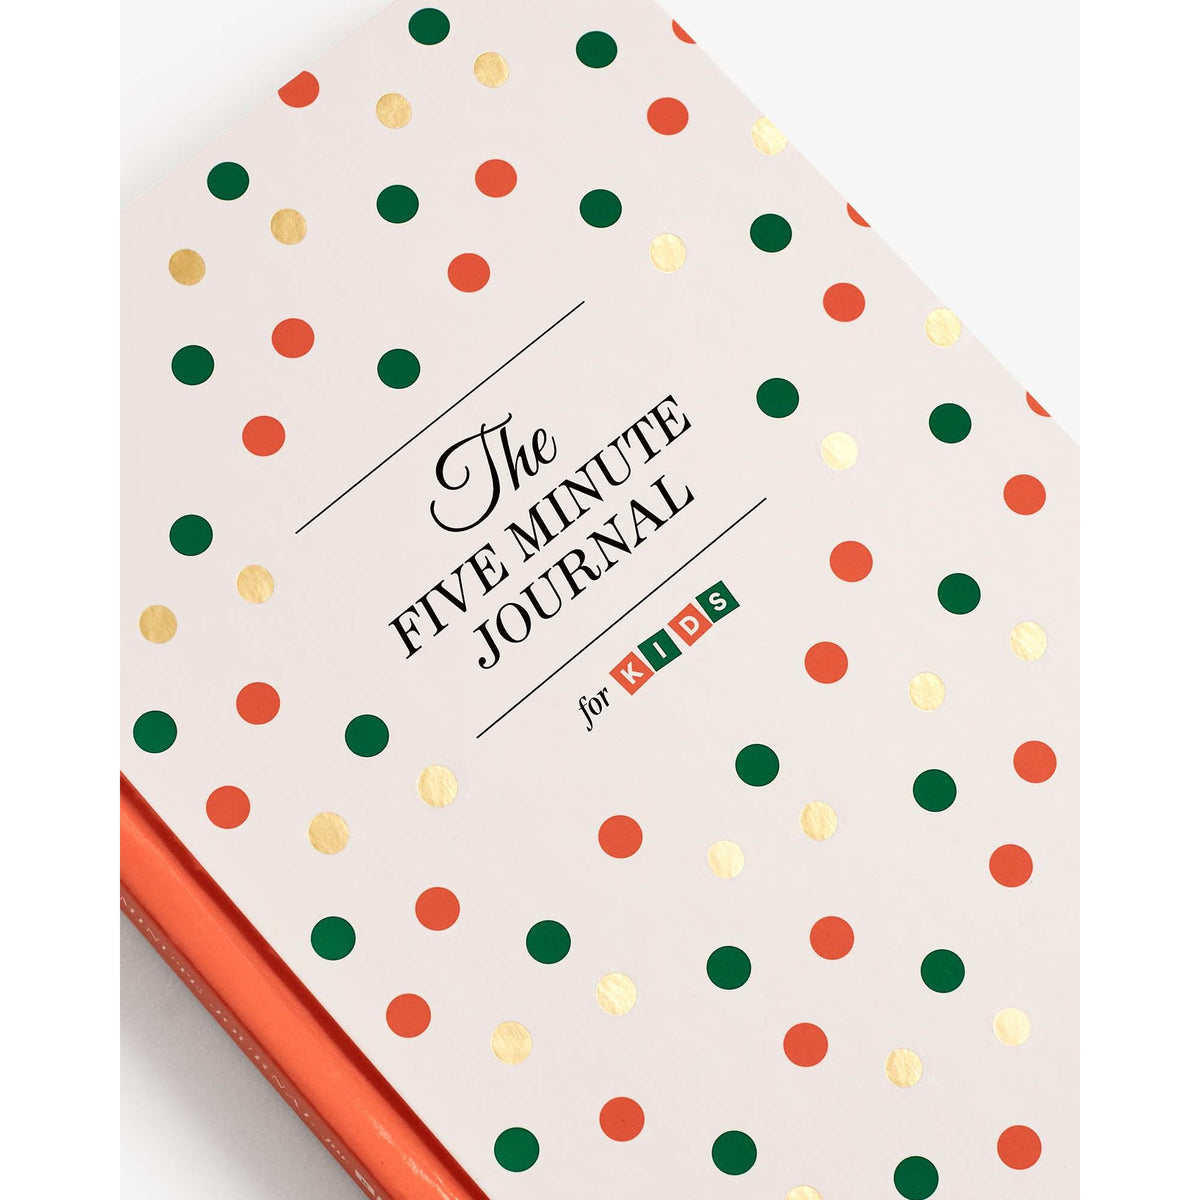 Five Minute Journal for Kids by Intelligent Change